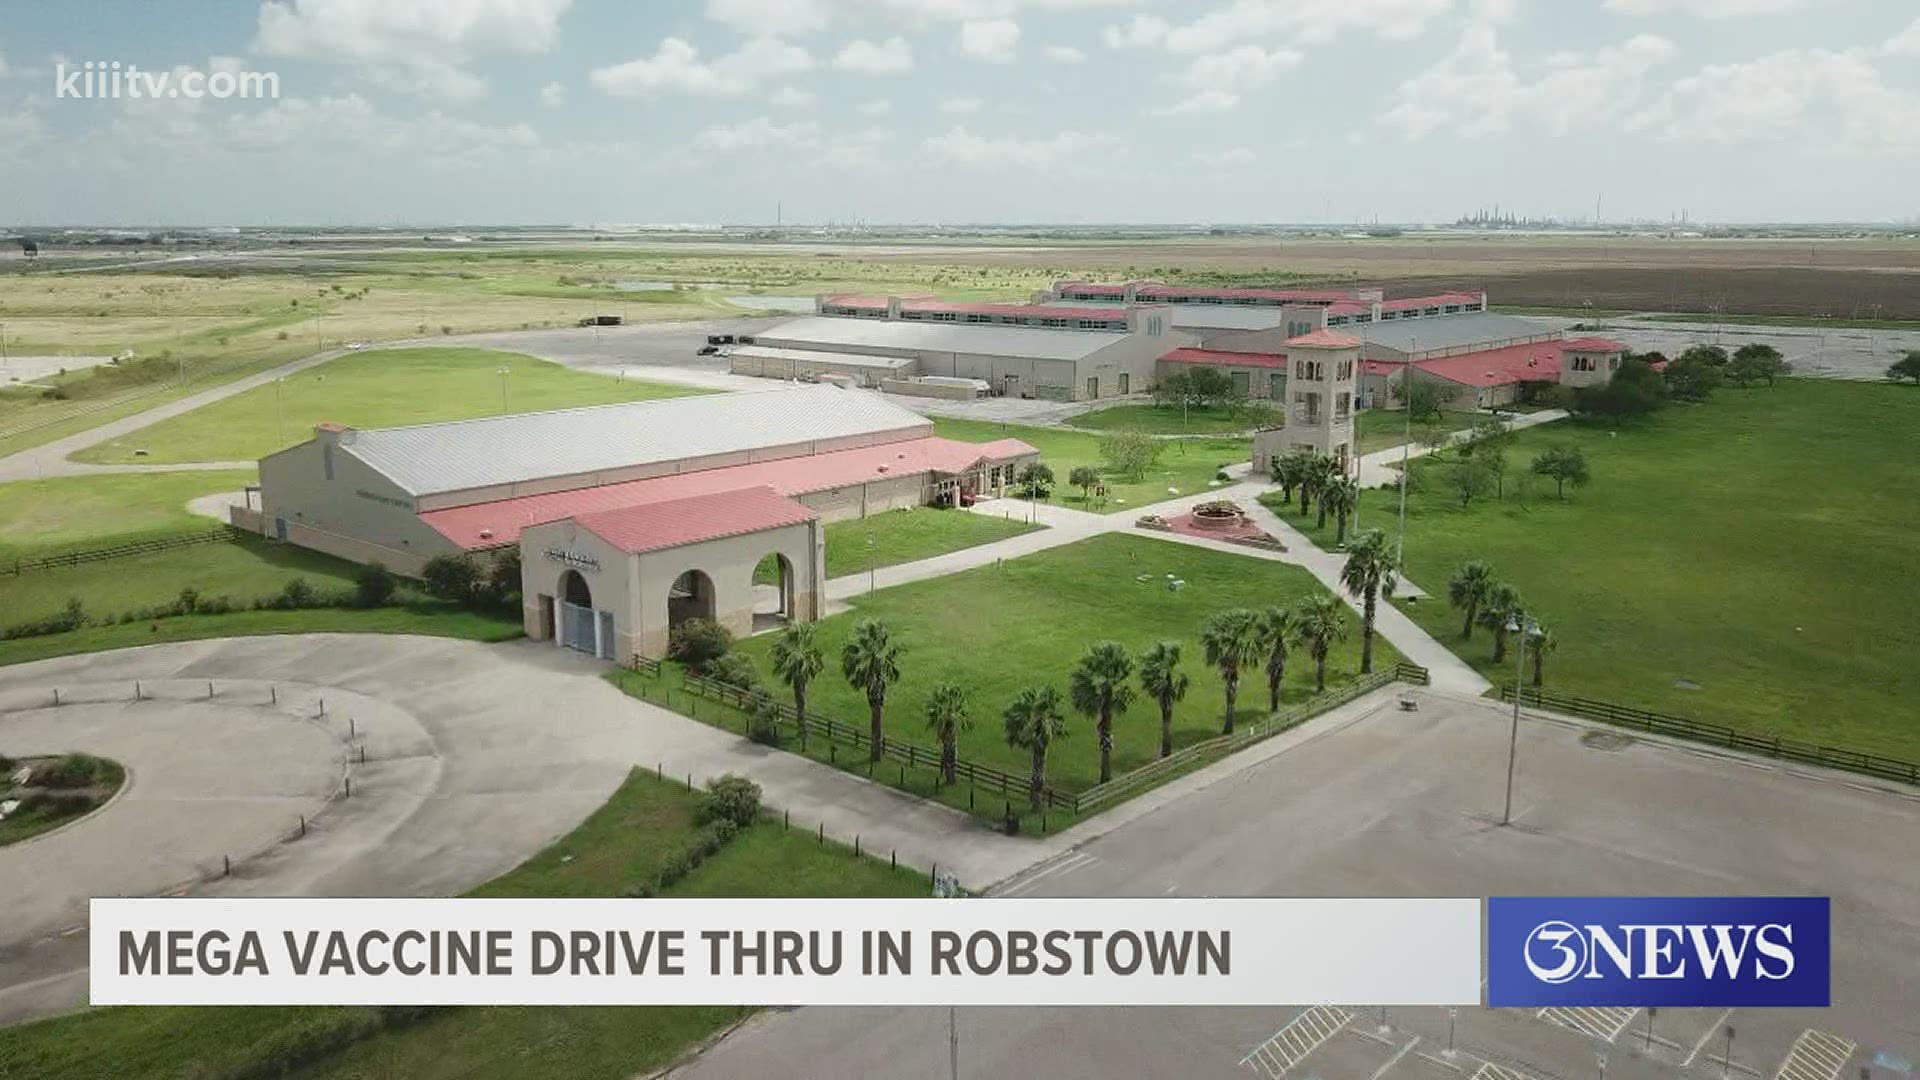 On Monday, January 11, the Robstown fairgrounds will host a mass vaccine distribution where 1,000 residents can get the Moderna COVID-19 vaccine daily.